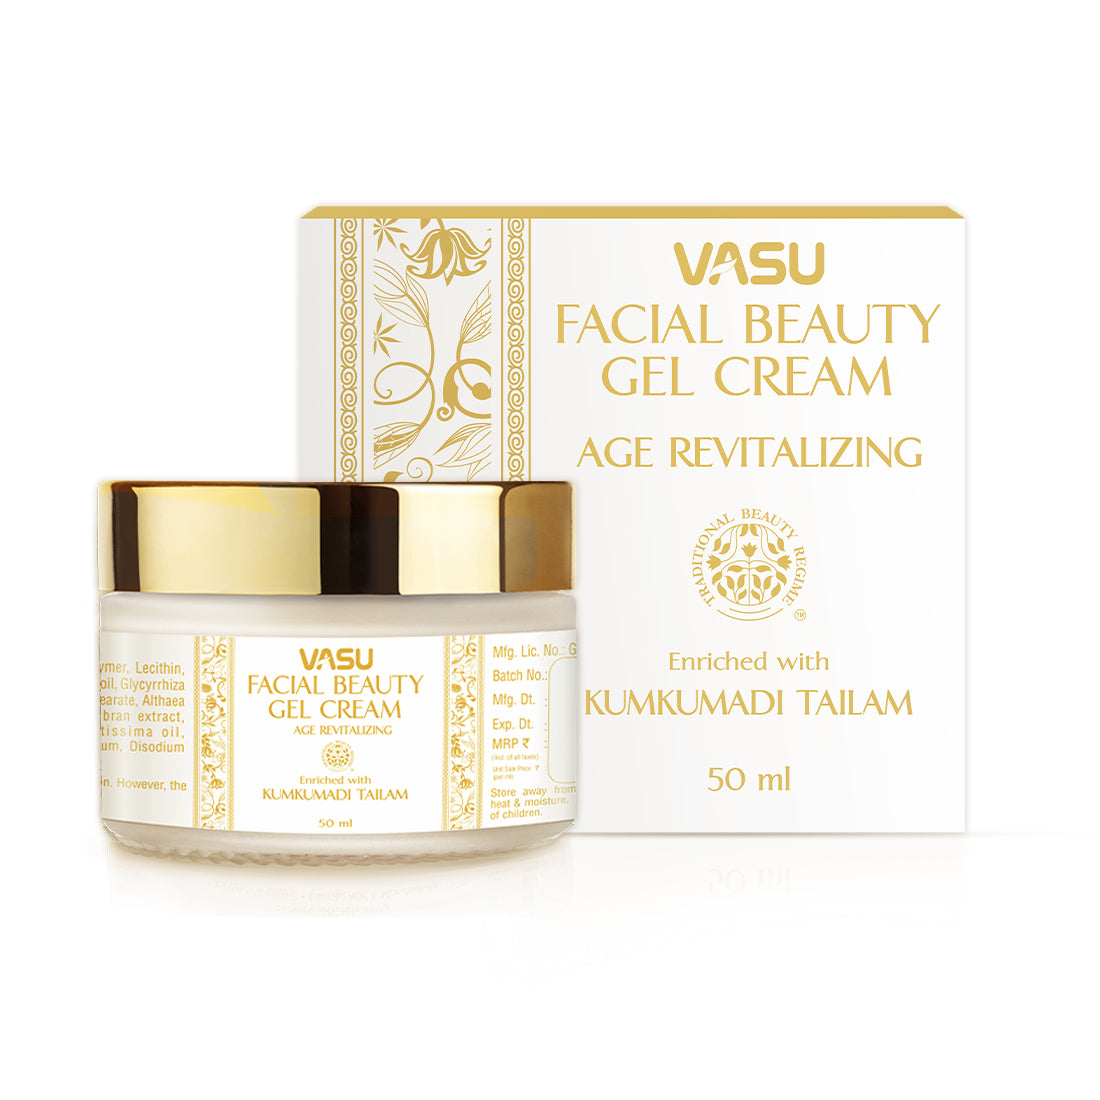 Vasu Facial Beauty Gel Cream - Enriched with Kumkumadi Tailam - Age Revitalizing - Reduce Hyperpigmentation & Age Spots - Novel Gelling Technology - Specially Formulated For Oily & Acne-prone Skin